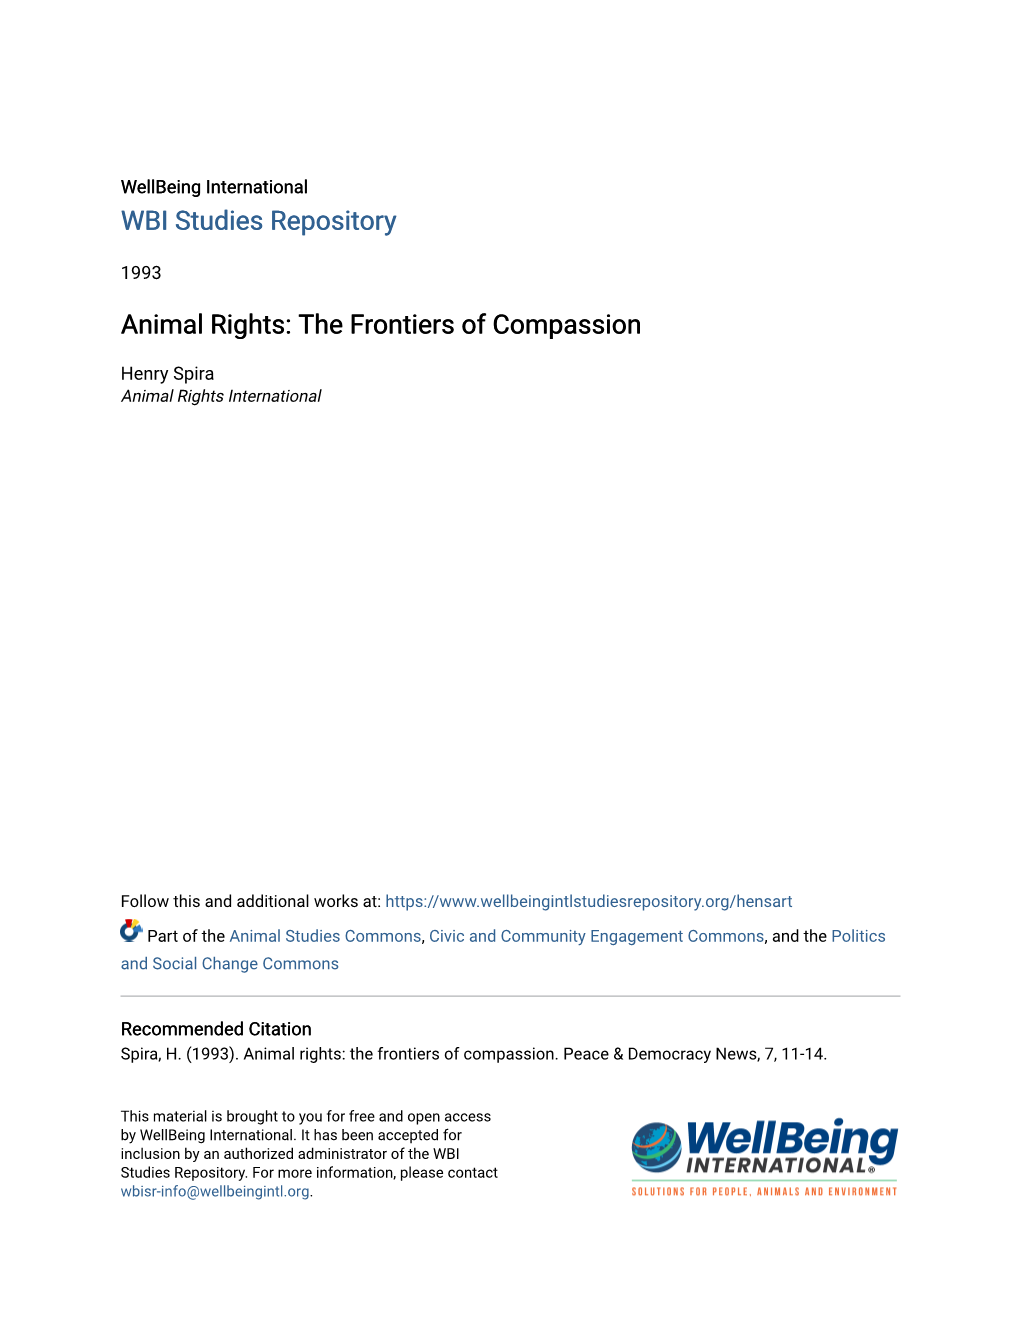 Animal Rights: the Frontiers of Compassion